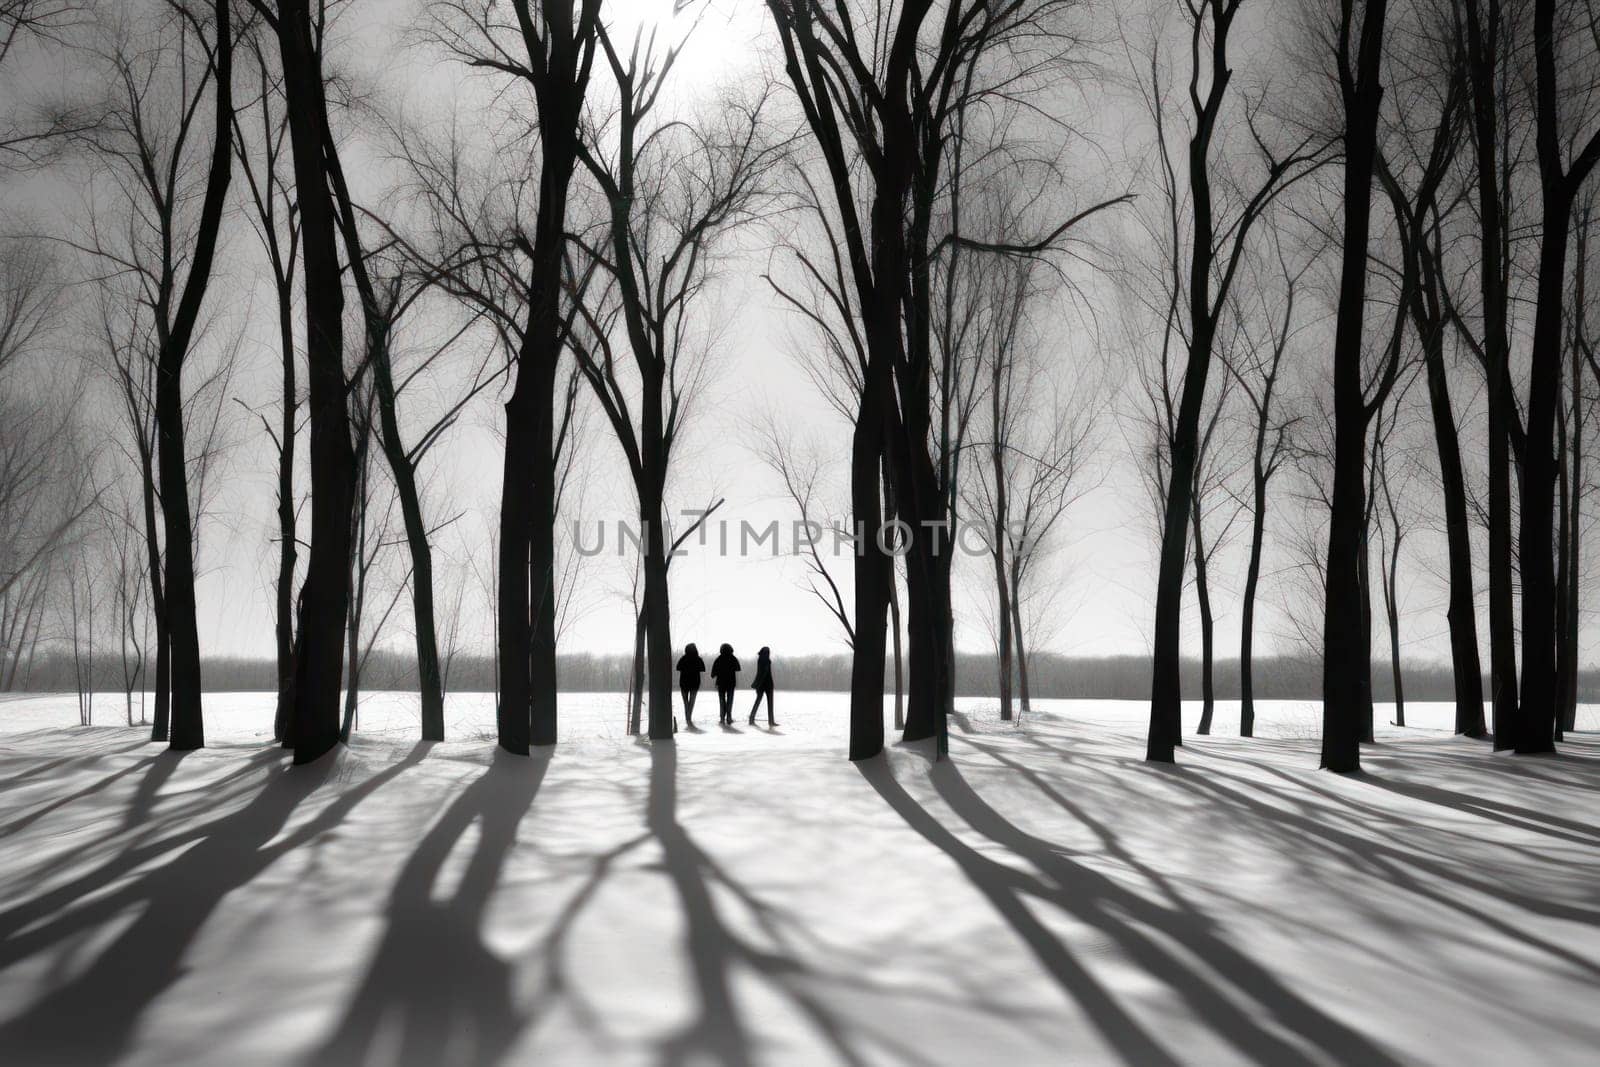 A striking visual display of the winter season, utilizing the extended shadows and sharp differences in lighting to craft captivating silhouettes against the snowy backdrop.